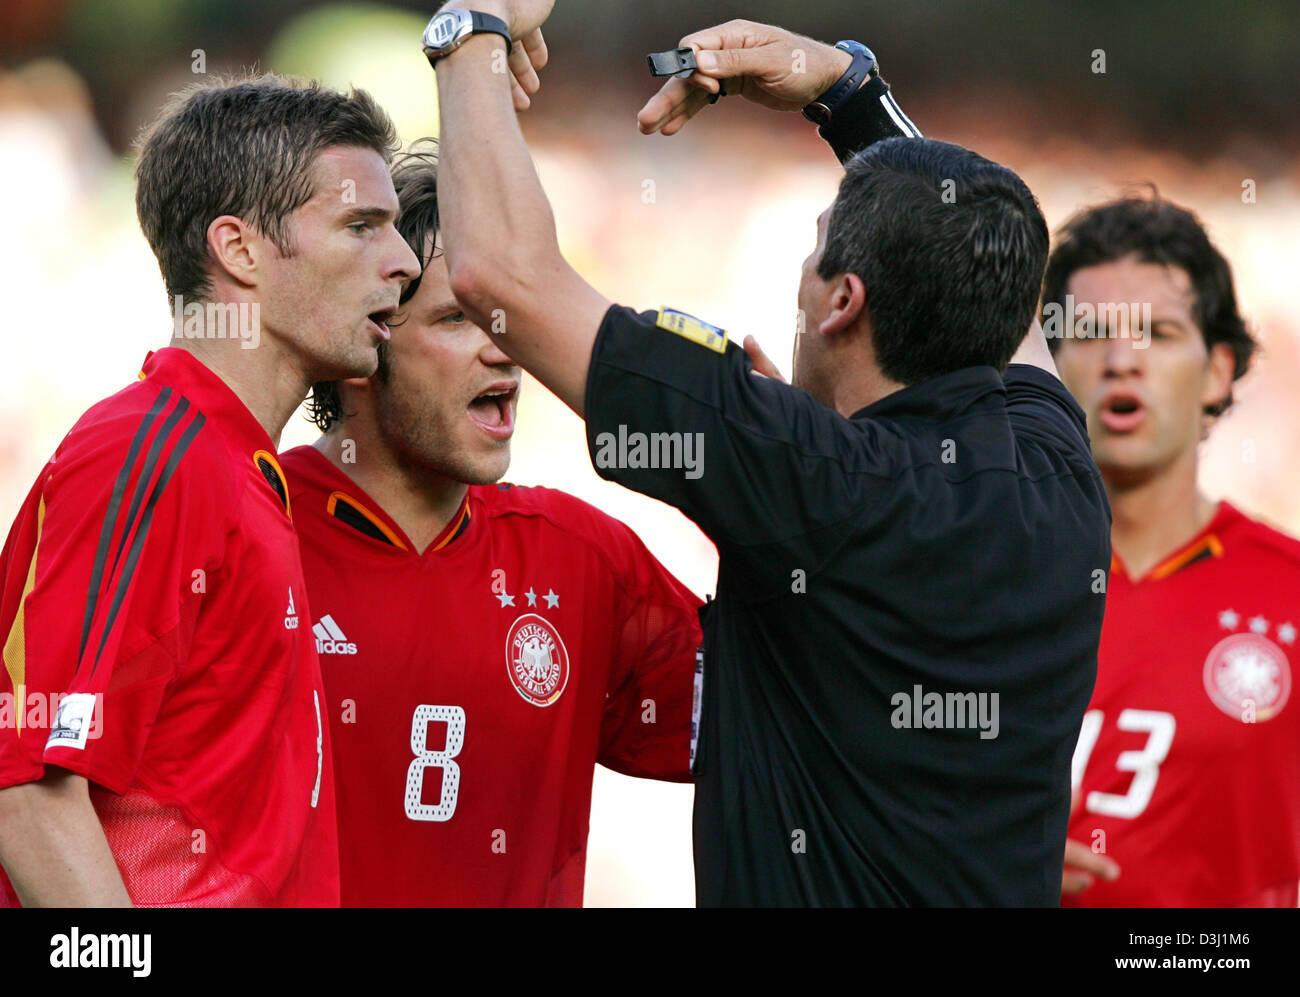 (dpa) - German soccer players Arne Friedrich (from L to R), Torsten Frings and Michael Ballack discuss with referee Carlos Chandia during the semi-final of the FIFA Confederations Cup tournament Germany vs. Brazil in Nuremberg, Germany, 25 June 2005. Stock Photo